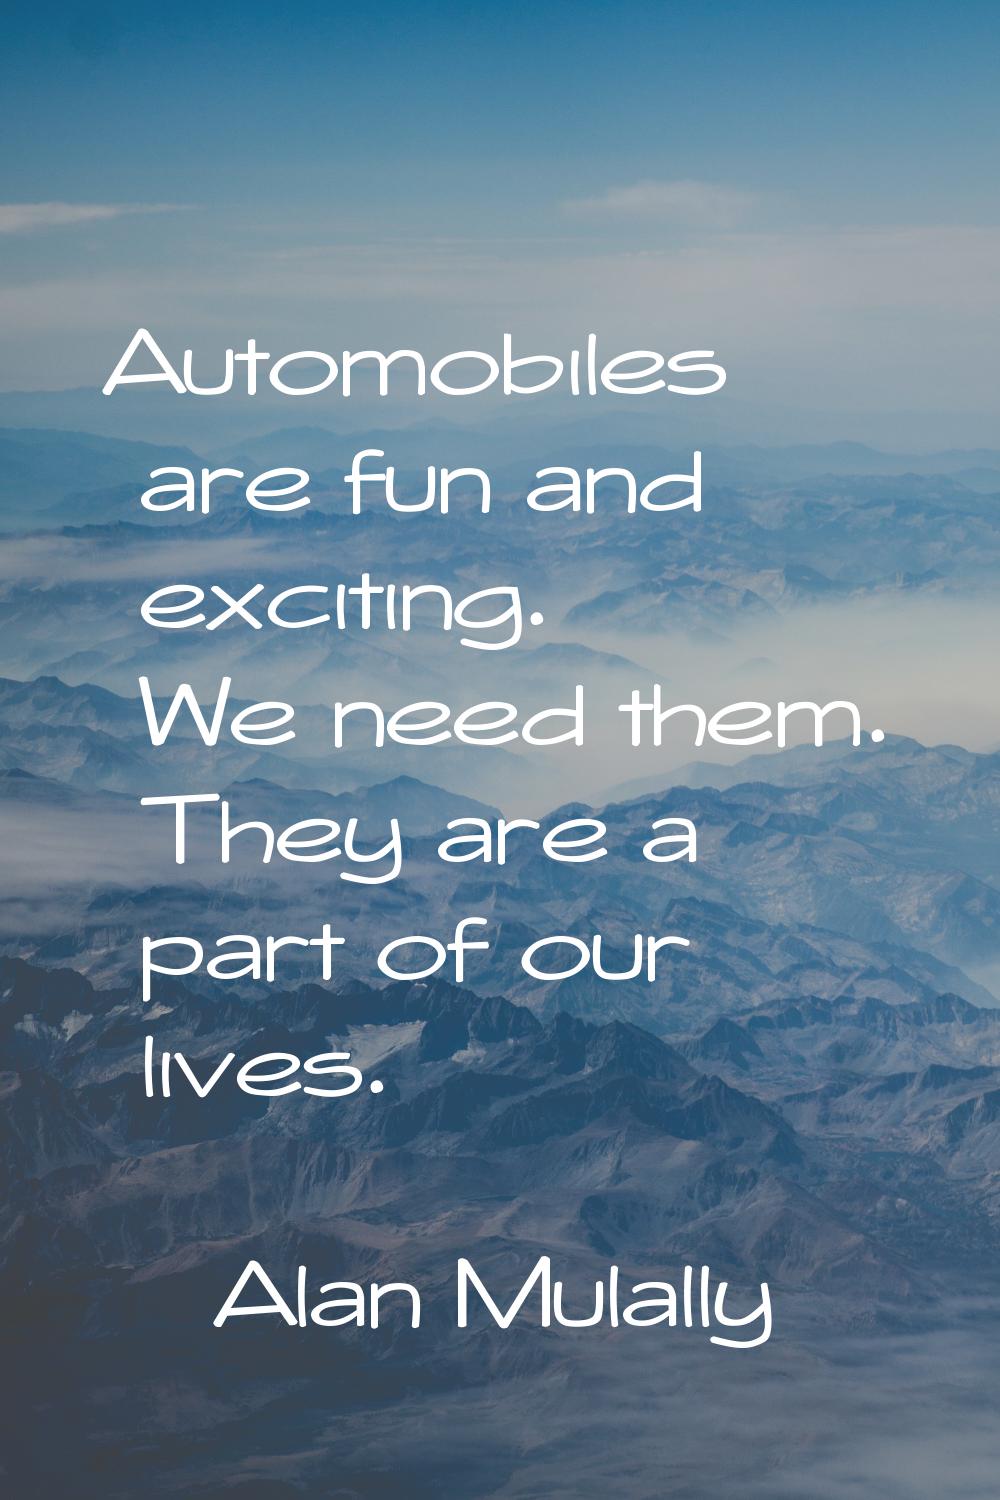 Automobiles are fun and exciting. We need them. They are a part of our lives.